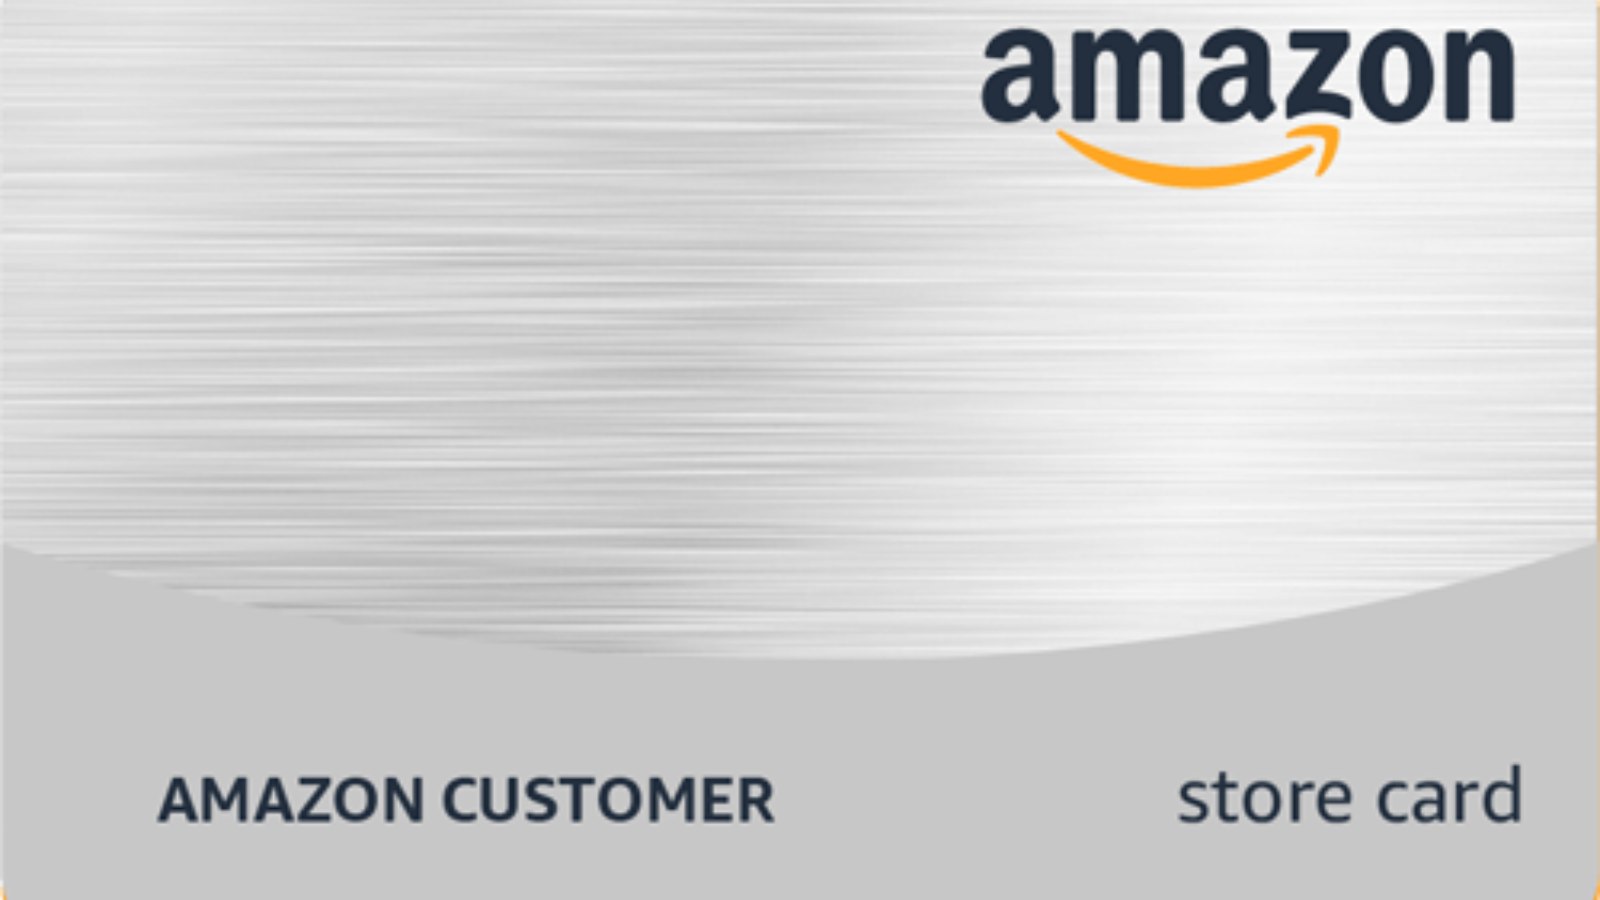 Amazon.com Store Card: Apply, Login, Benefits, Payments, and more ...